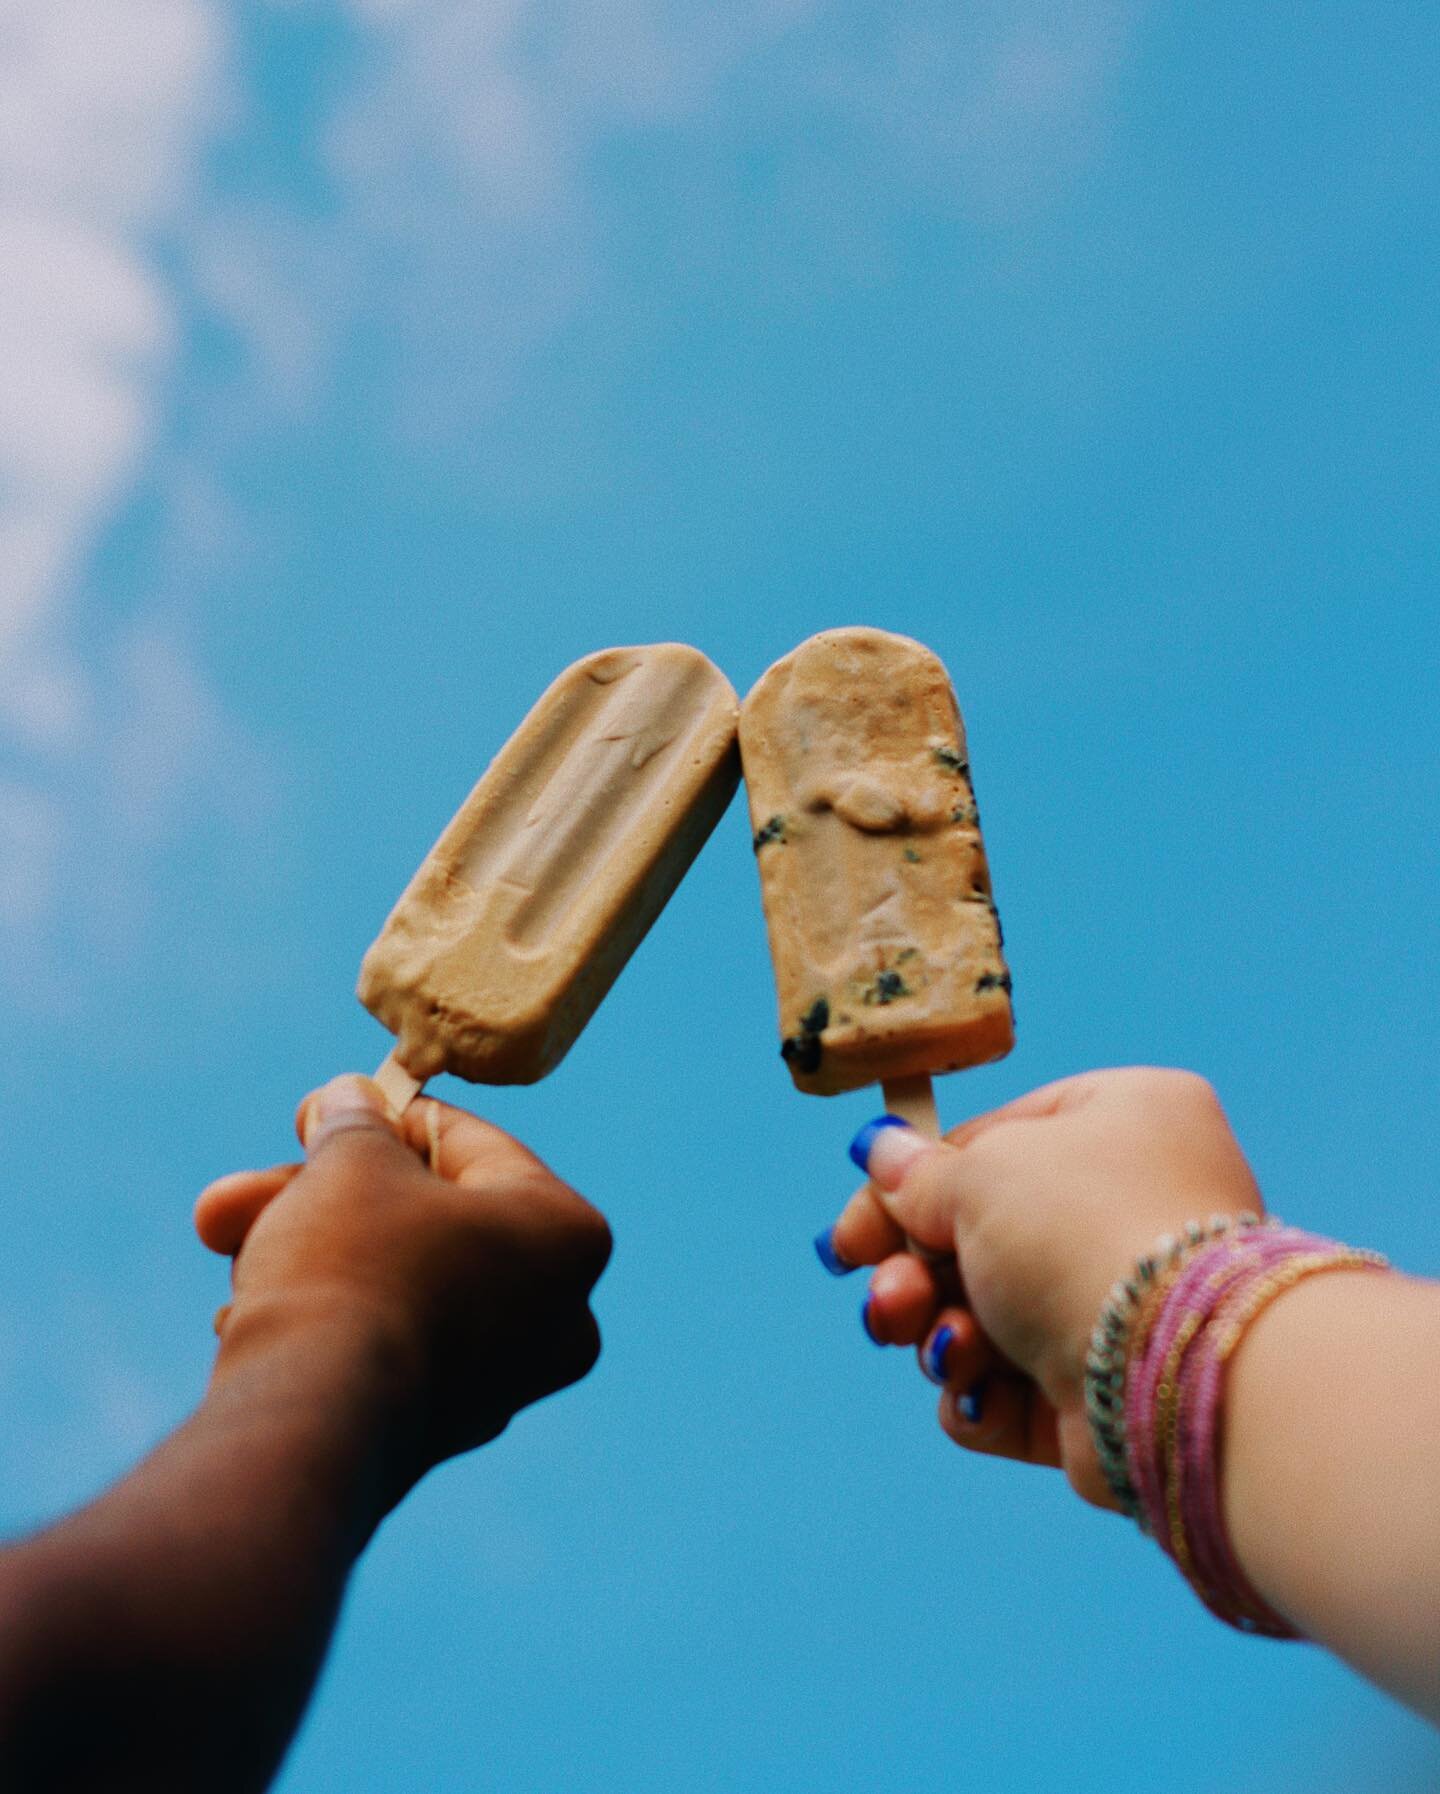 What&rsquo;s better than a frozen latte on a stick on a hot summer day? 

(Starting tomorrow 7/9)

We are so excited about our newest collaboration with local business @foodiepopsga! 

Come try the &ldquo;Cafe Au Leit&rdquo; and &ldquo;Cafe Au Leit C